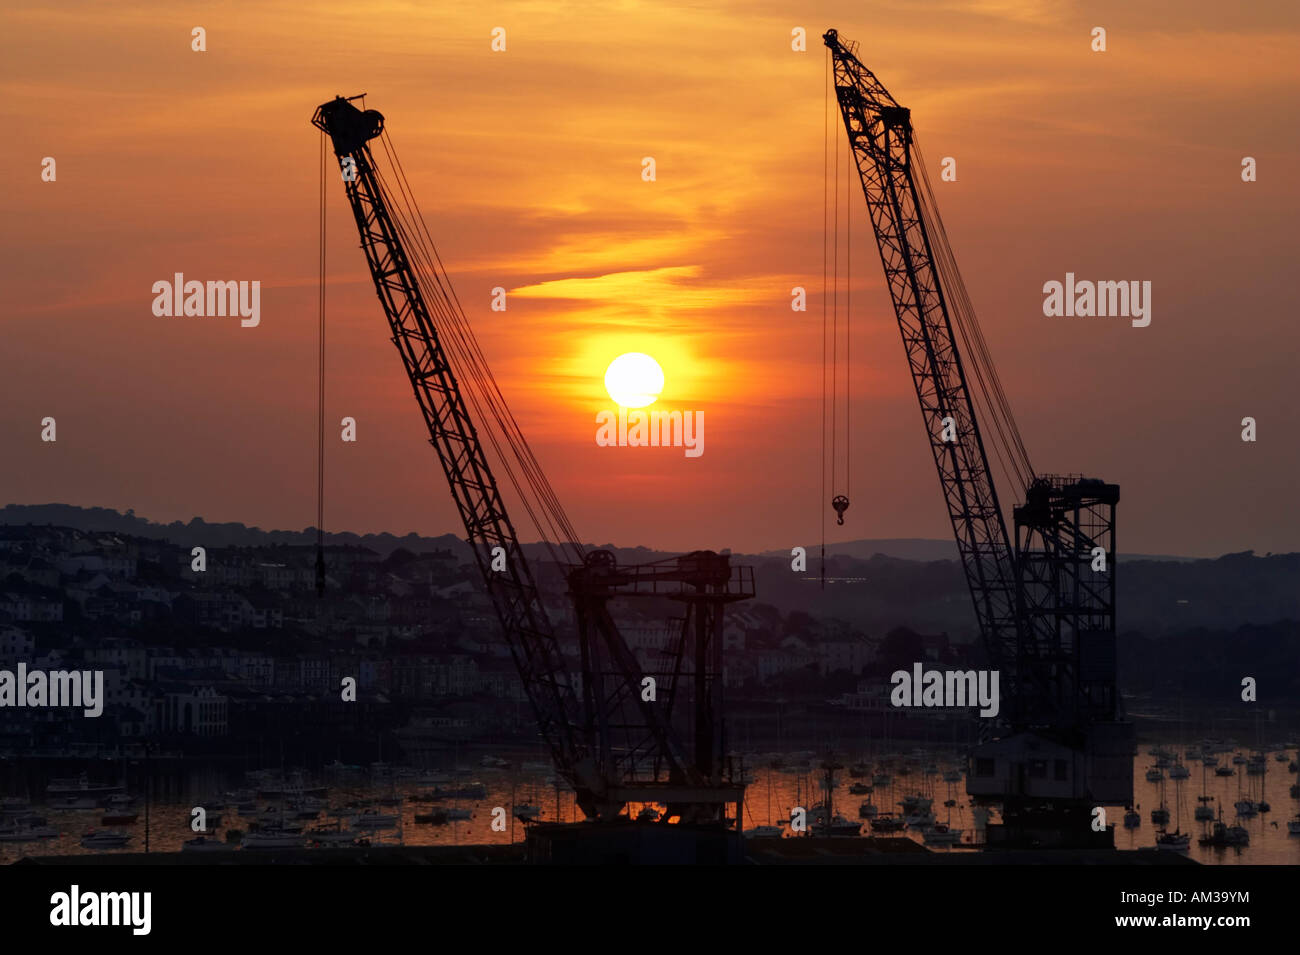 Cranes at Falmouth docks silhouetted at sunset with yachts and boats moored behind. Falmouth, Cornwall, UK Stock Photo